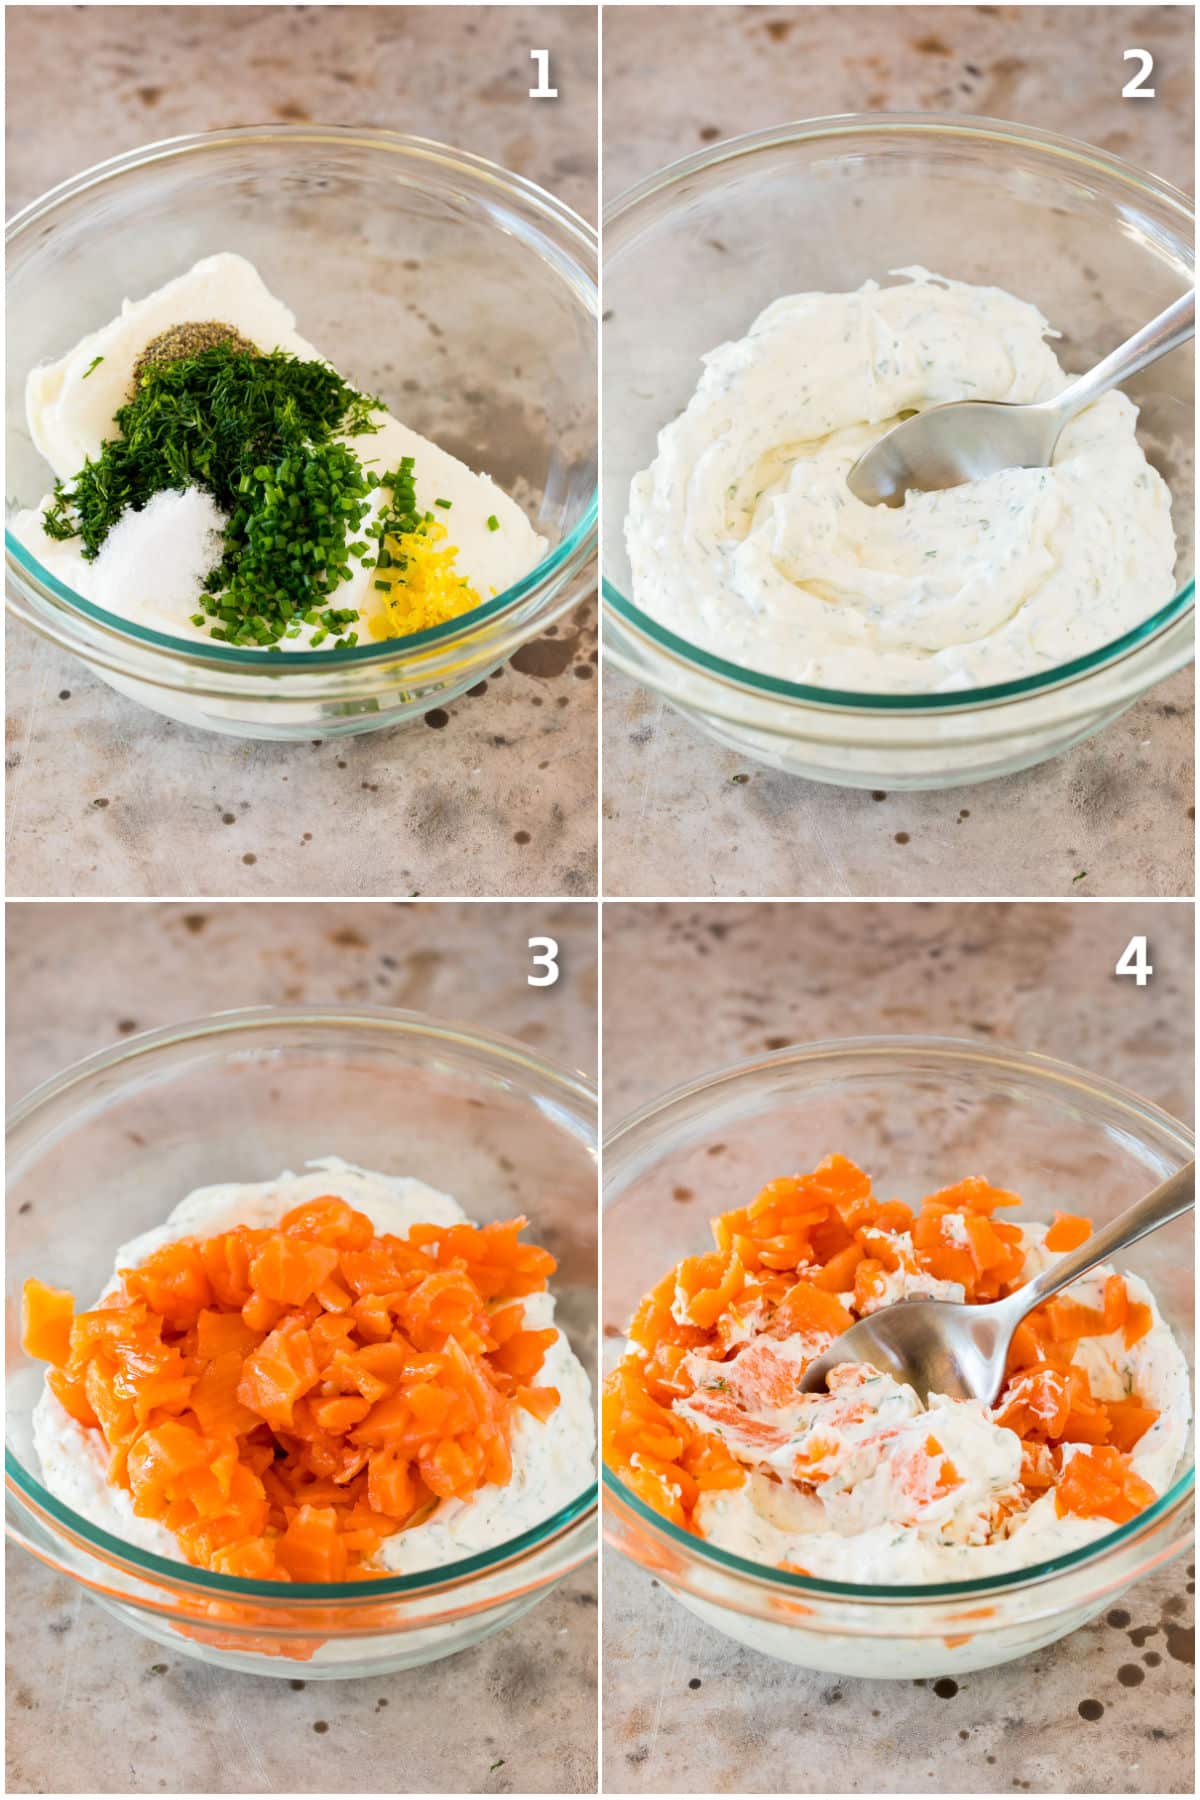 Step by step process shots showing how to make smoked salmon dip.